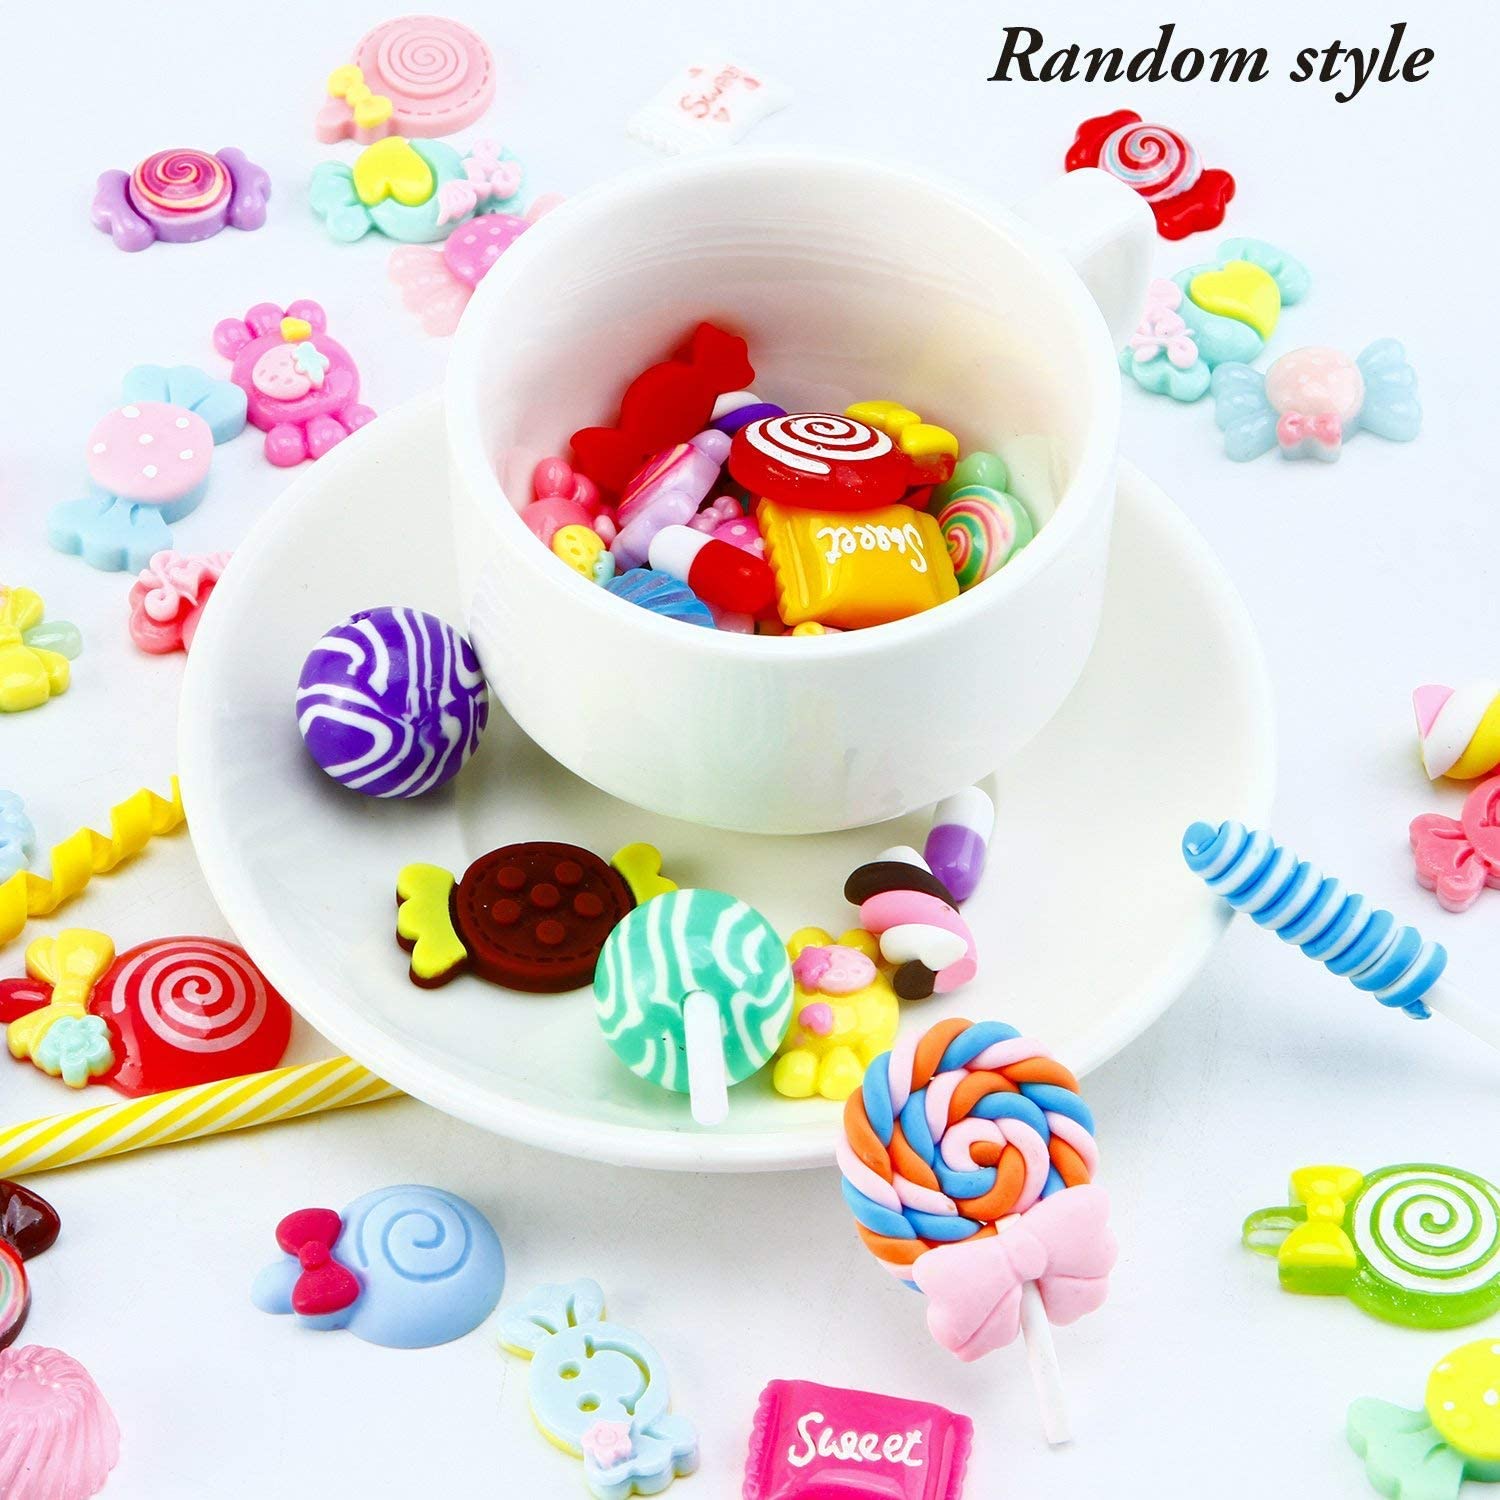 Amerteer 60Pieces of Slime Charm Cute Set Resin Charm Mixed Assorted Candies Candy Resin Flat Back Slime Beads Making Supplies for DIY Craft Making and Decoration Scrapbook - image 3 of 8